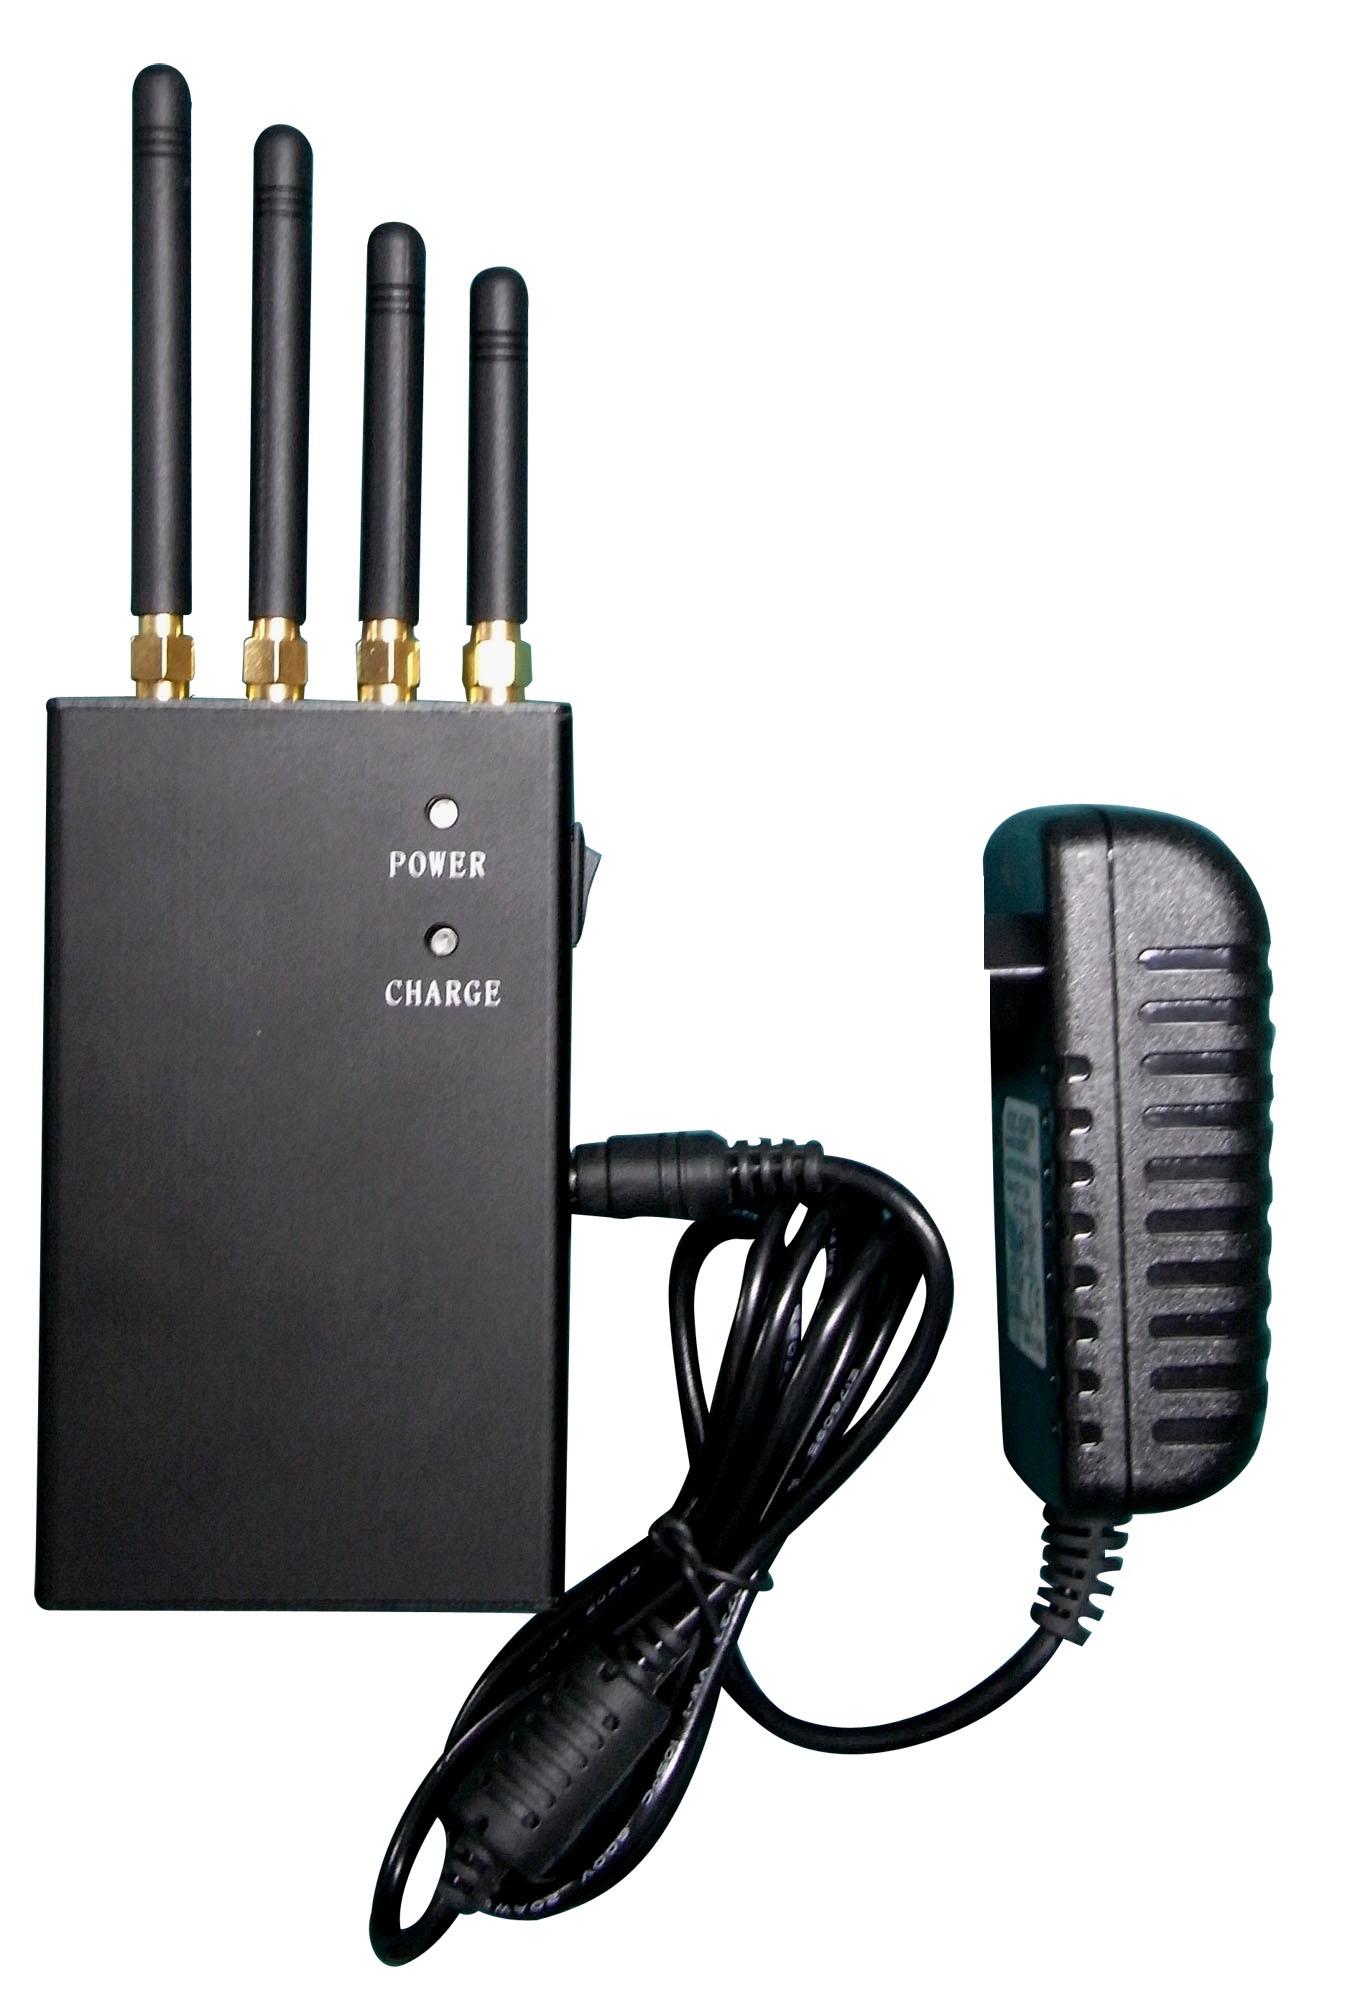 High power desktop jammer WIFI and mobile network